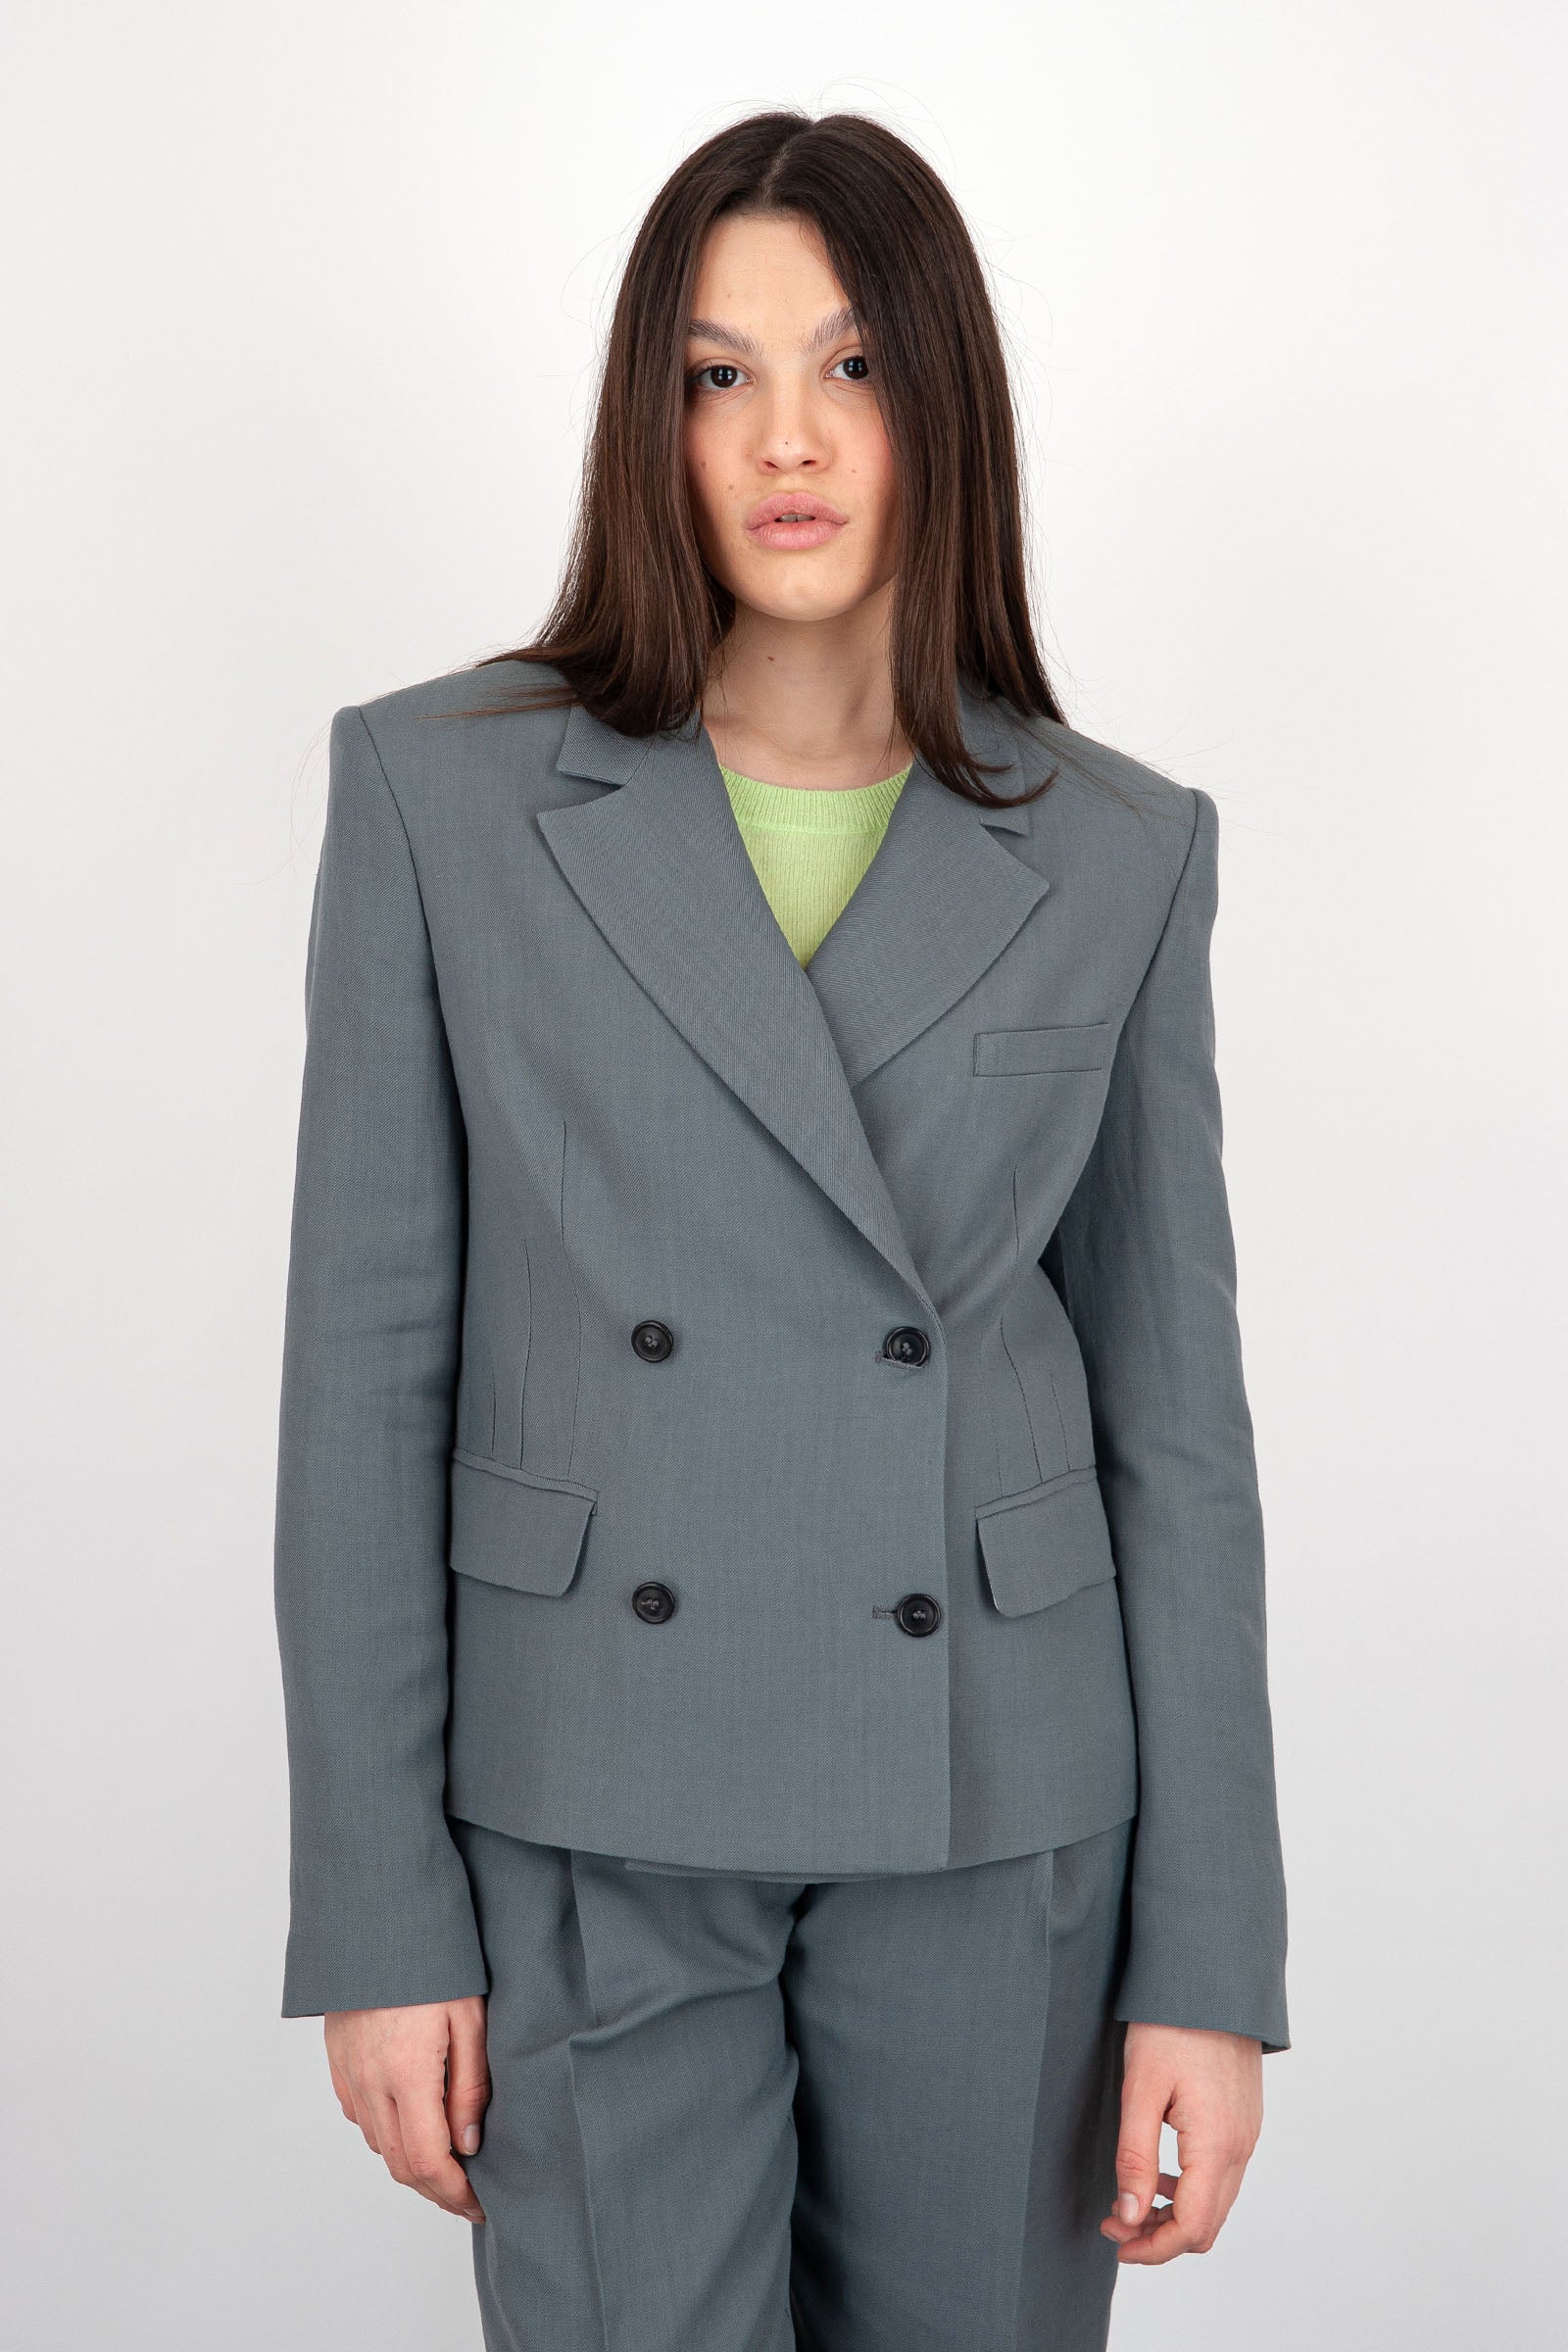 Grifoni Double-Breasted Linen Grey Jacket - 1